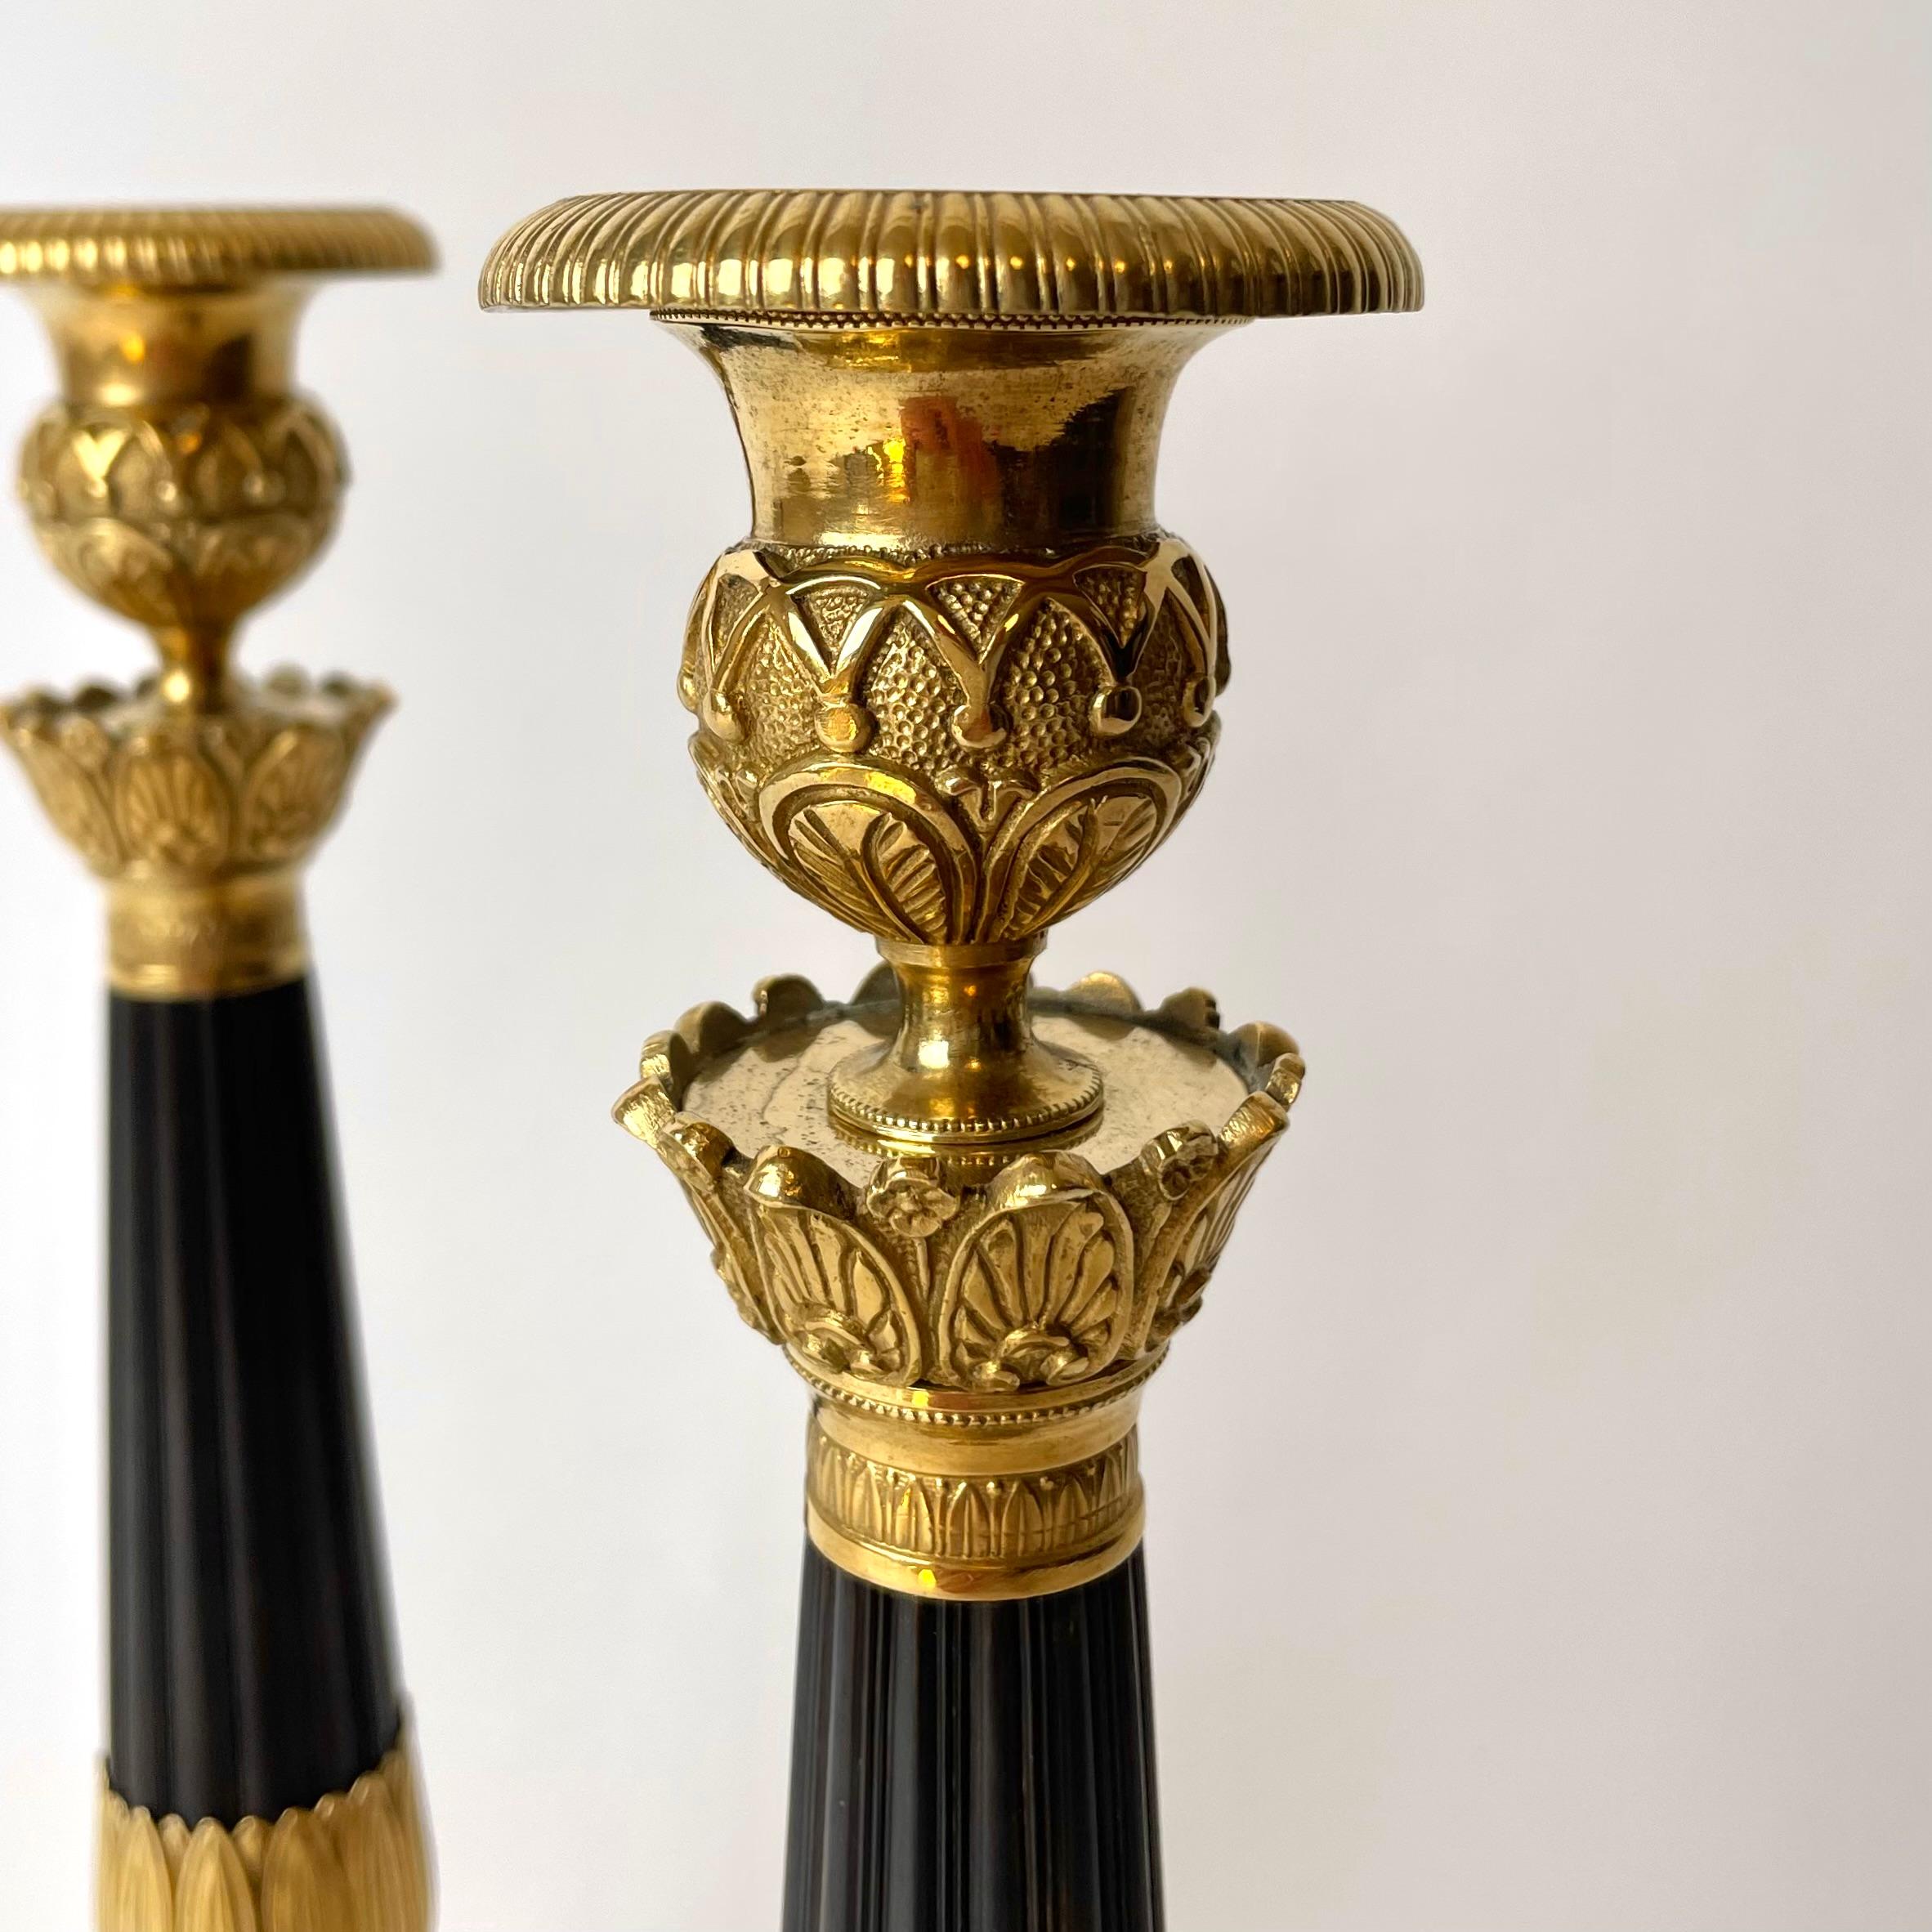 Pair of Empire Candlesticks, Gilded and Patinated Bronze, Early 19th Century For Sale 1